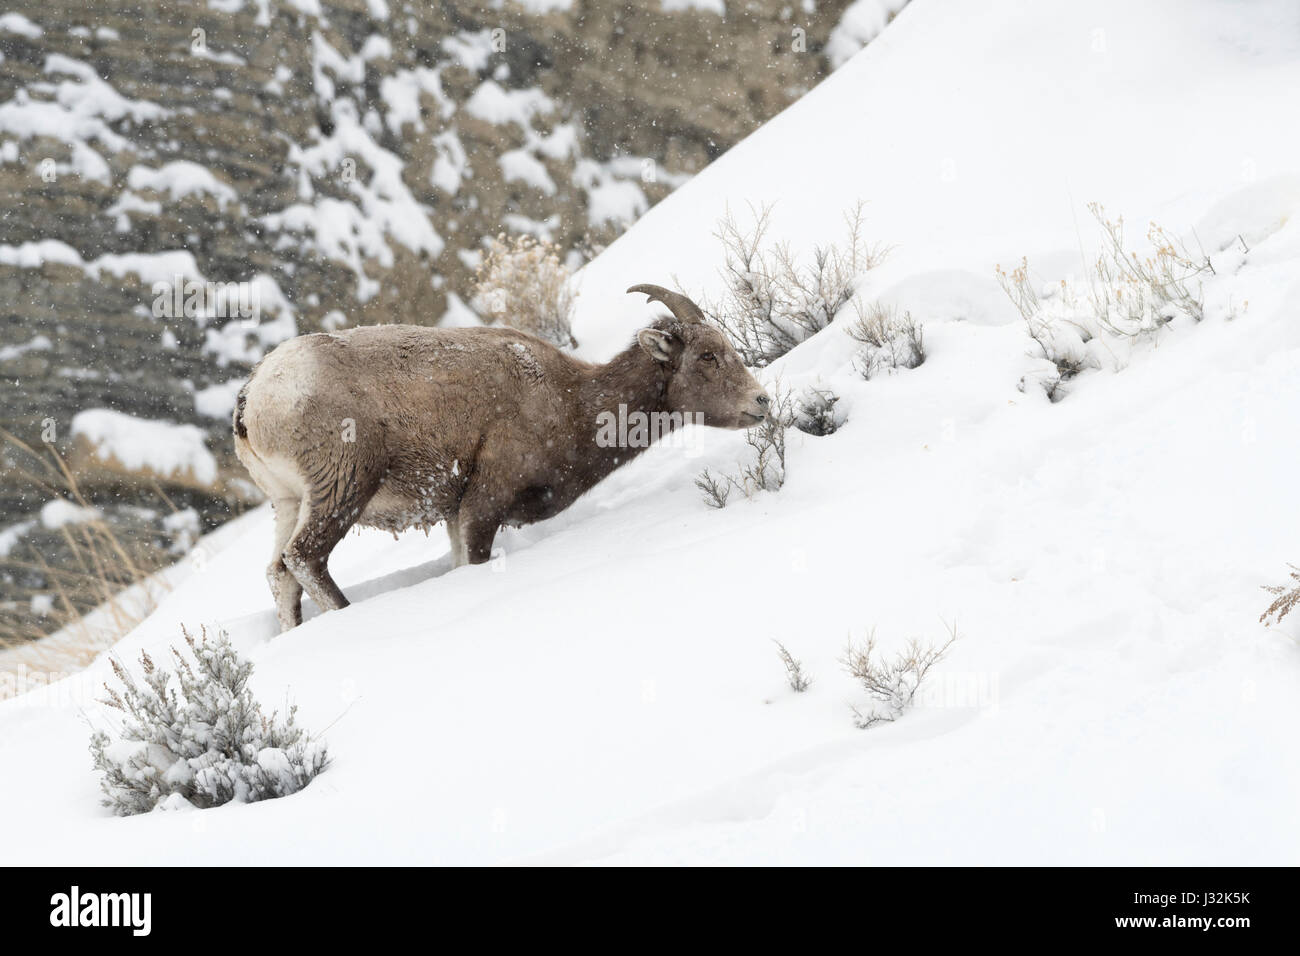 Rocky Mountain Bighorn Sheep / Dickhornschaf ( Ovis canadensis ) in winter, adult female adult, feeding on snow covered shrubs, Yellowstone National P Stock Photo